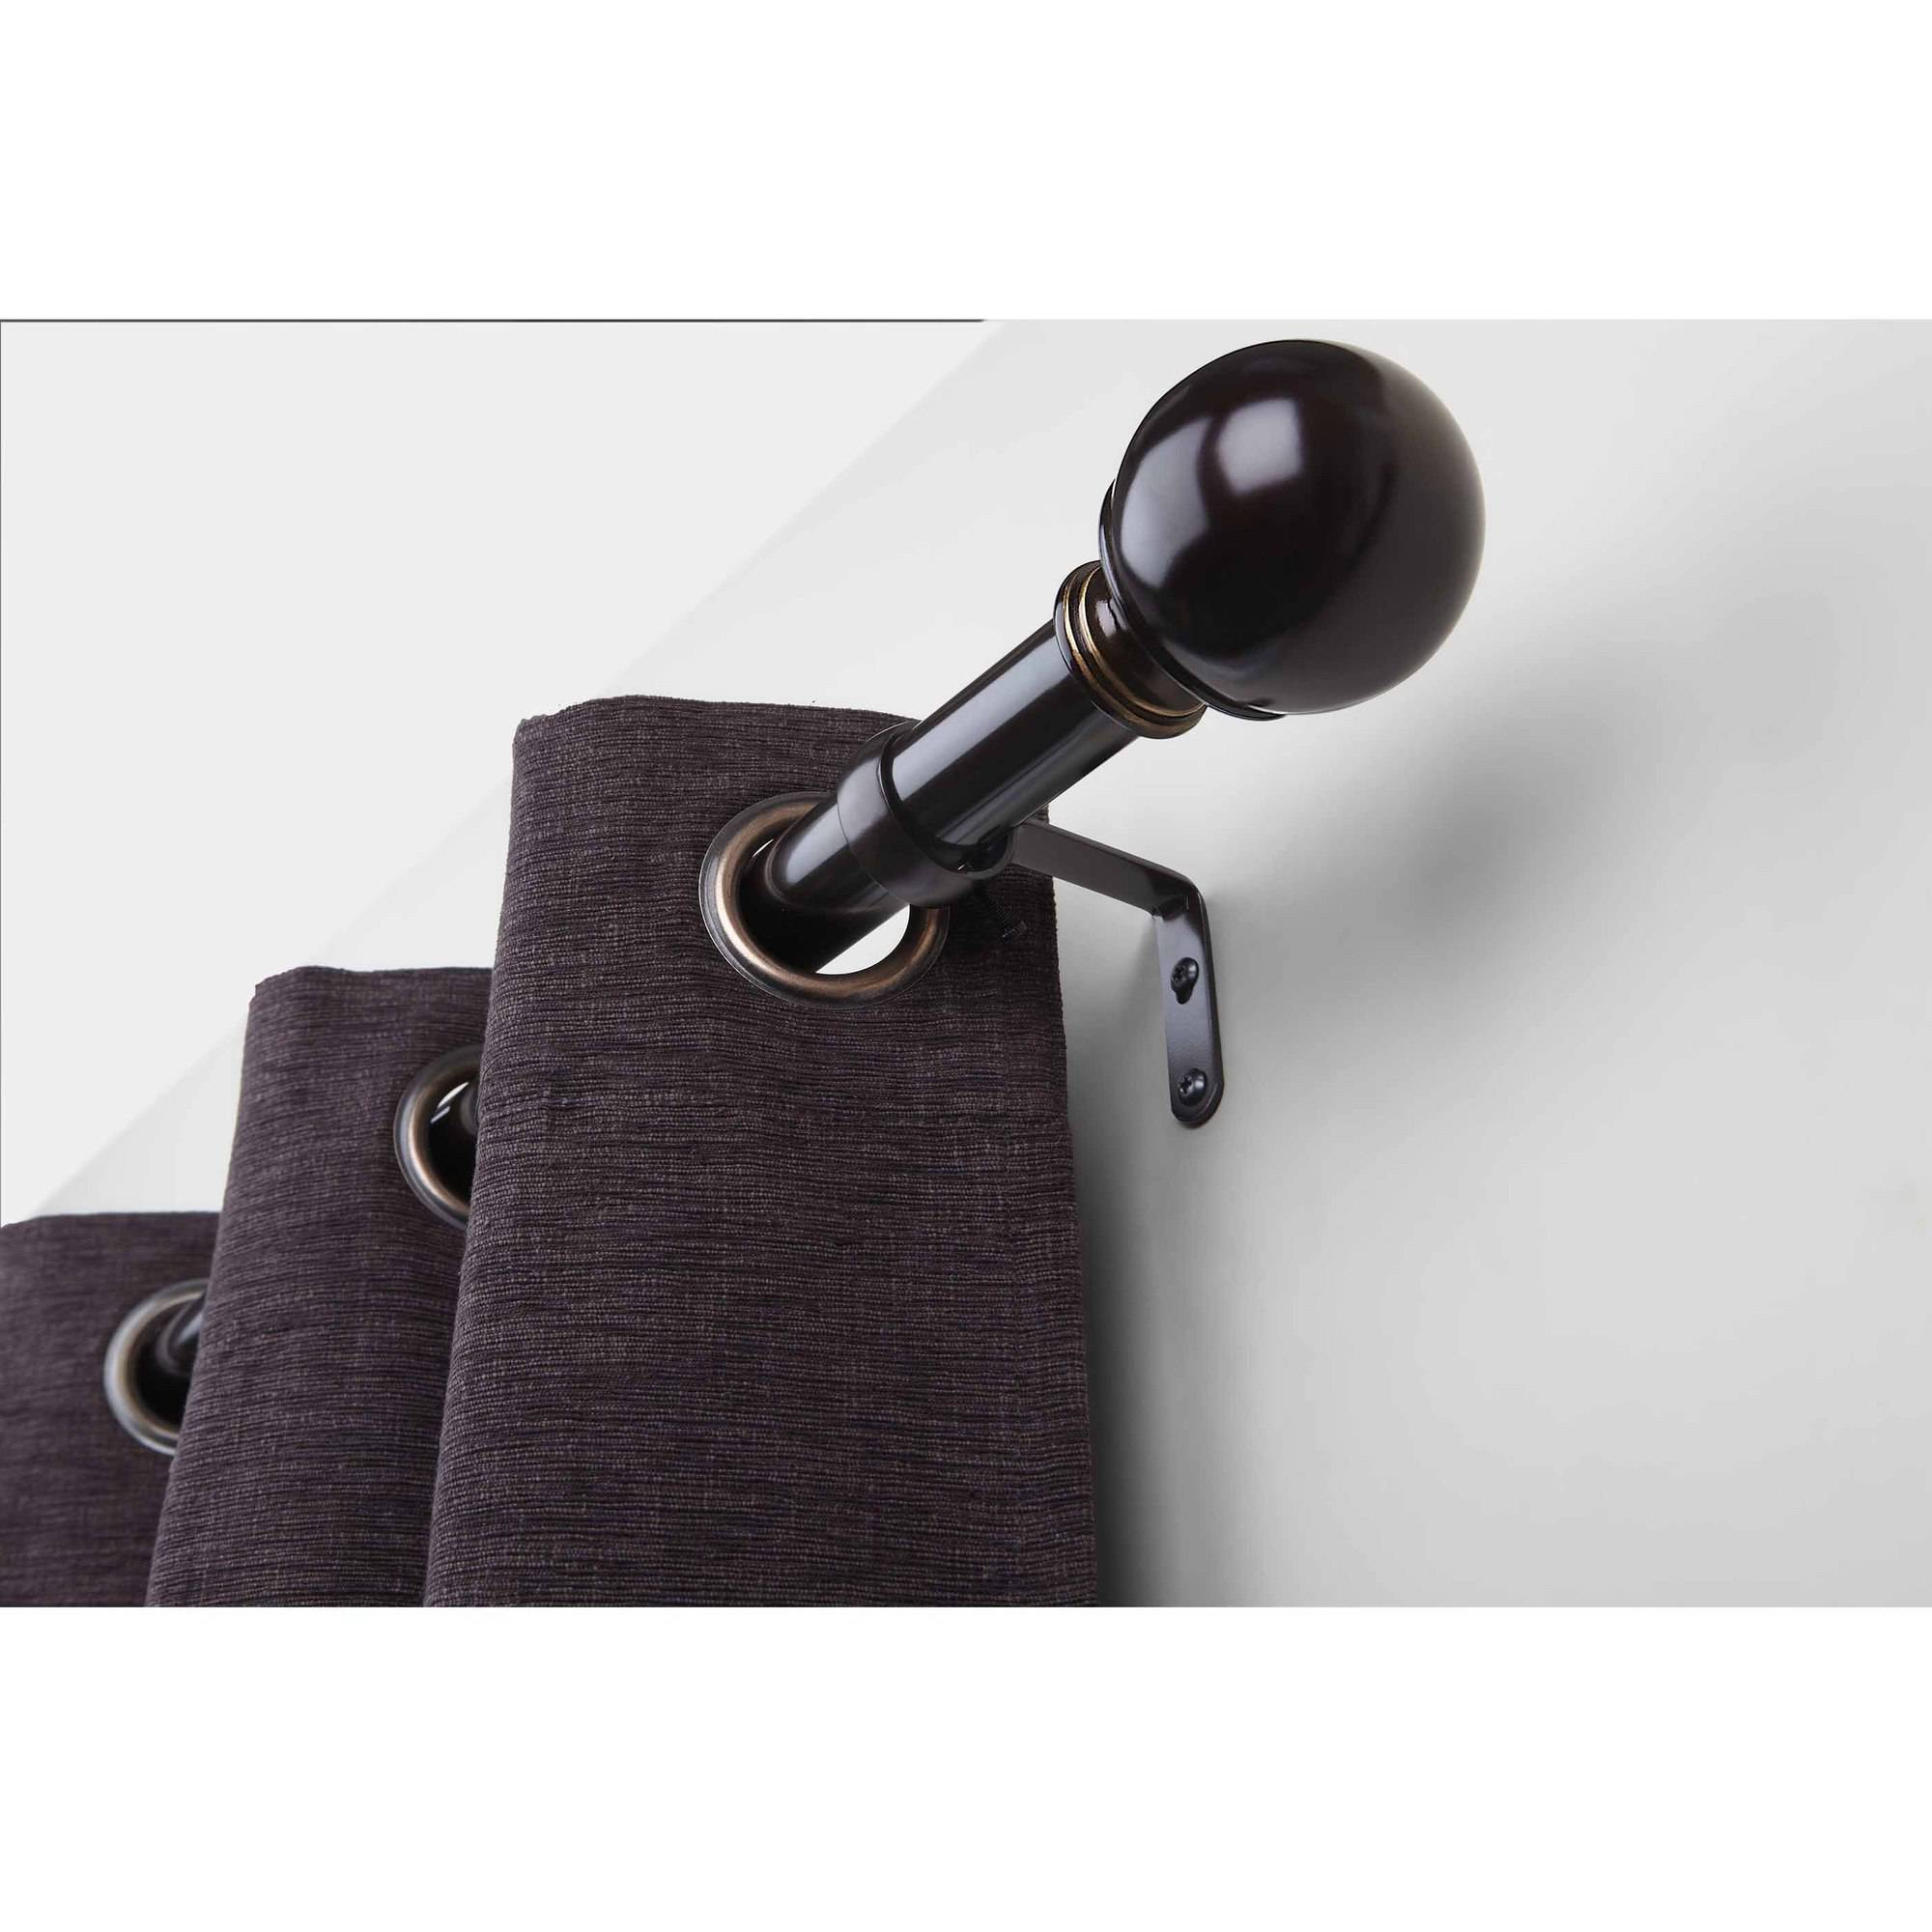 Better Homes & Gardens 1" Oil Rubbed Bronze Single Curtain Rod, 36-66", Bronze - image 3 of 3